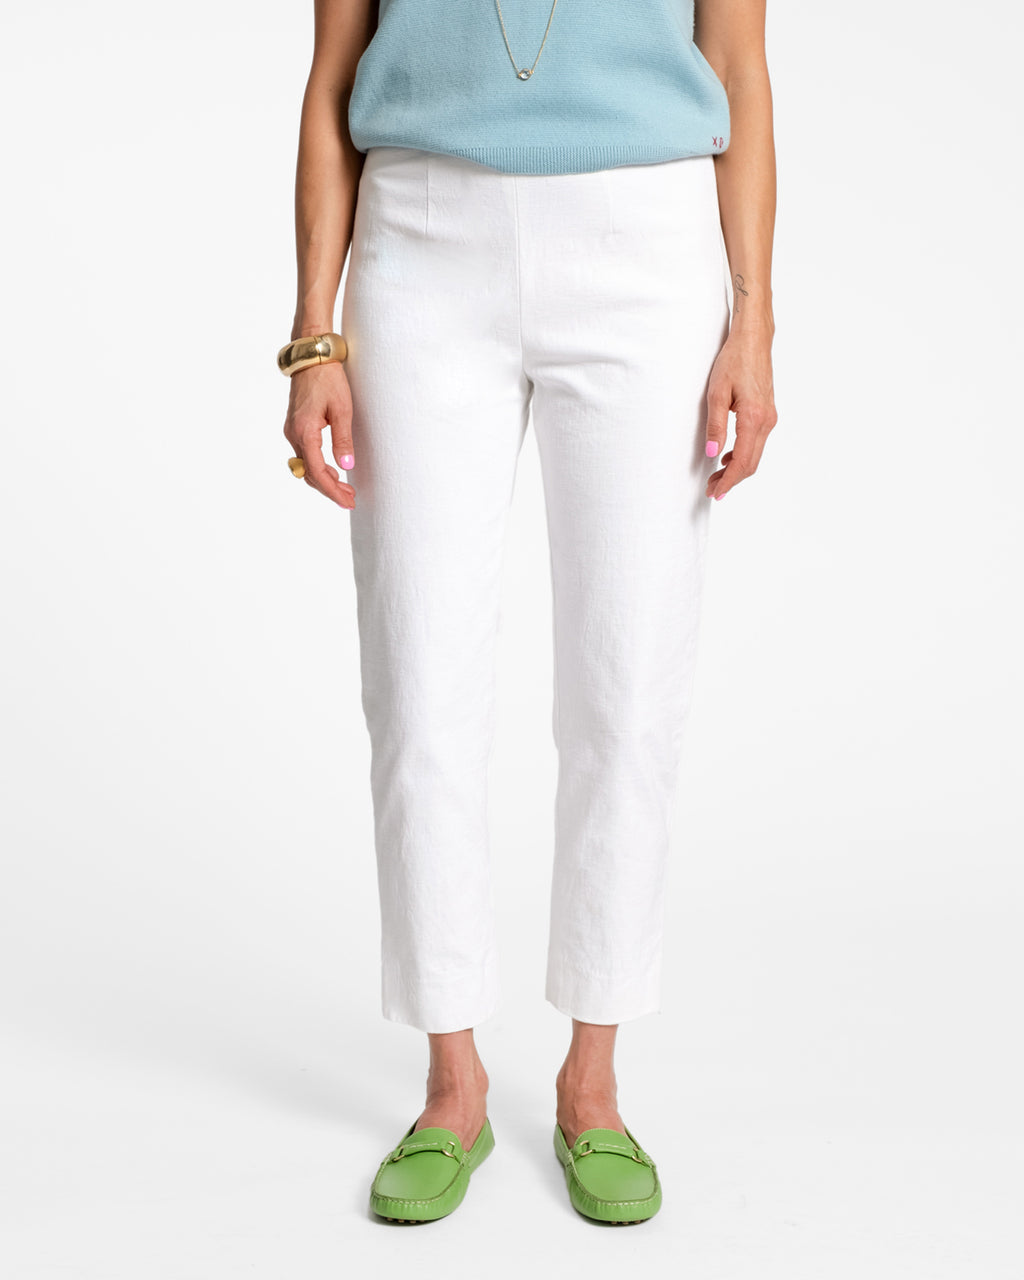 TALBOTS CHATHAM ANKLE PANTS - SOLID. Size 8, BRAND NEW. WHITE